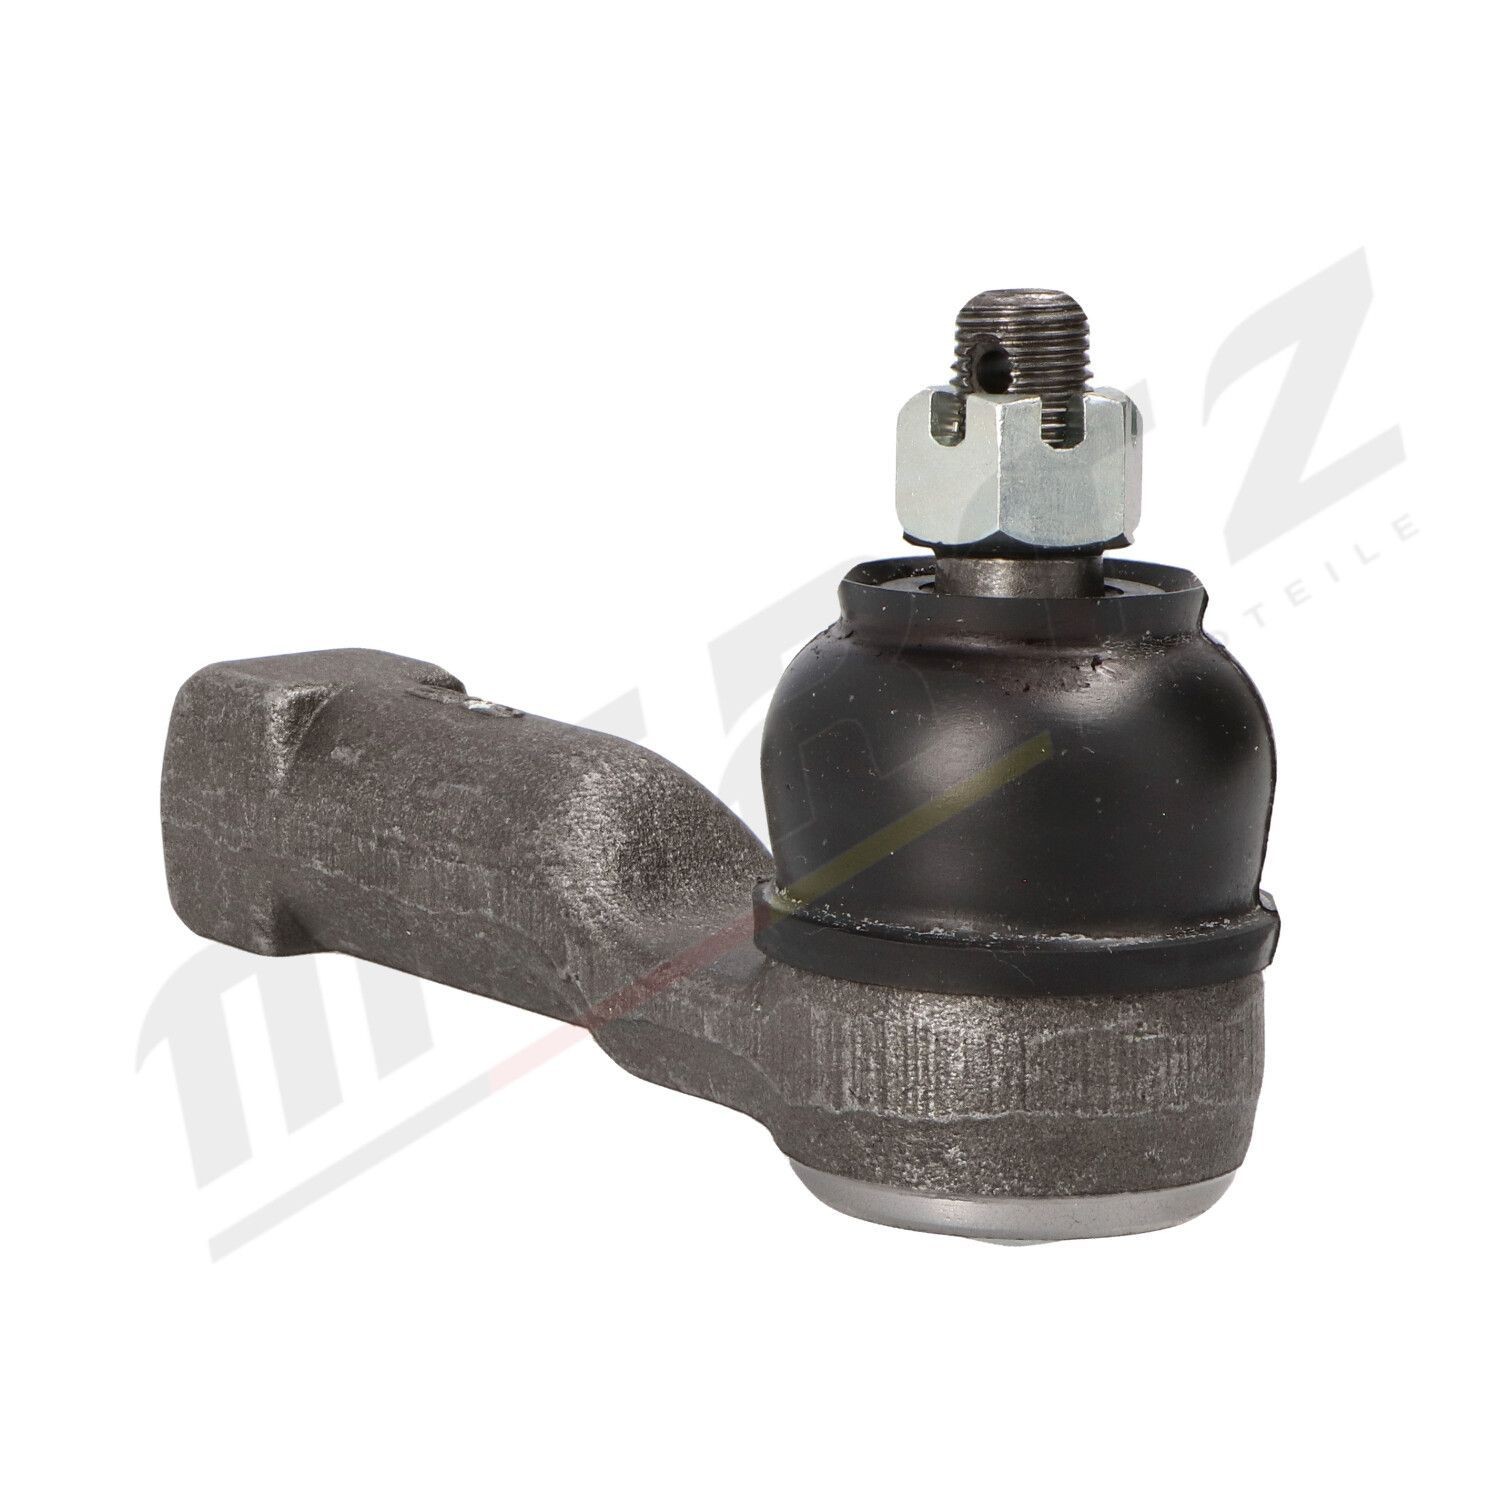 M-S1566 Tie rod end M-S1566 MERTZ M12X1,25 mm, Front Axle Left, Front Axle Right, with crown nut